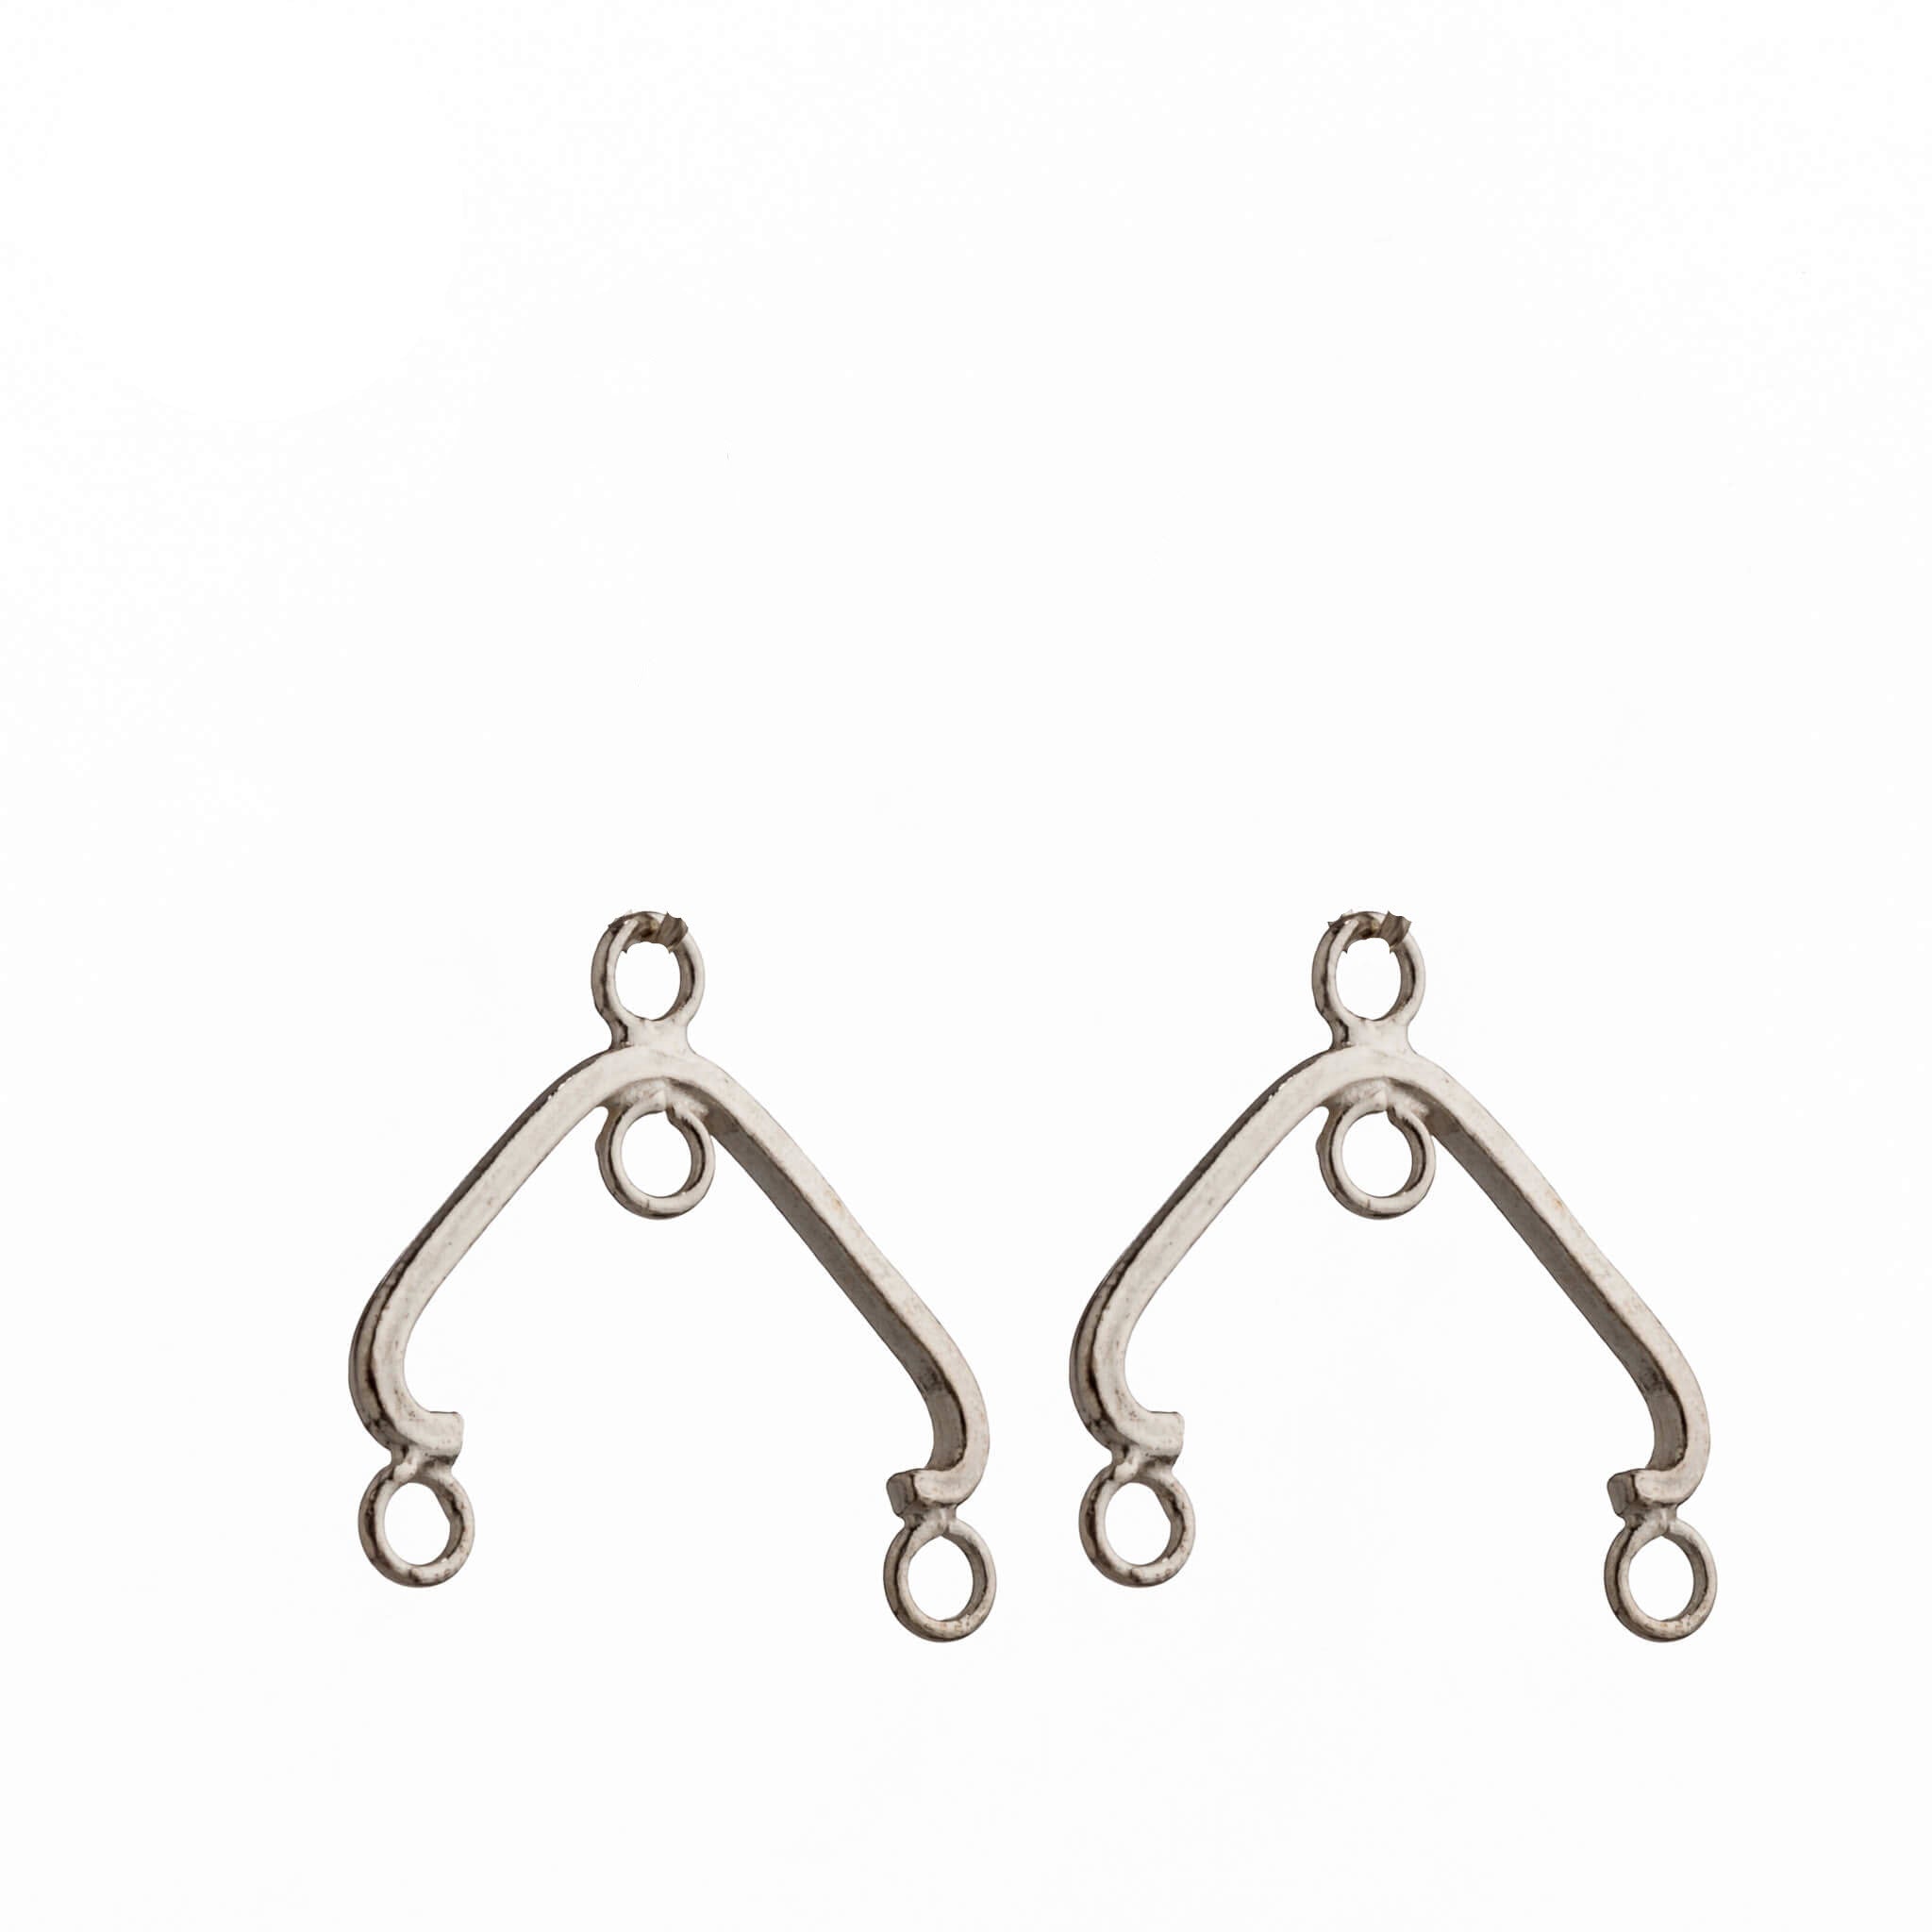 Curved Earring Components in Sterling Silver 30.1x16.5mm 22 Gauge